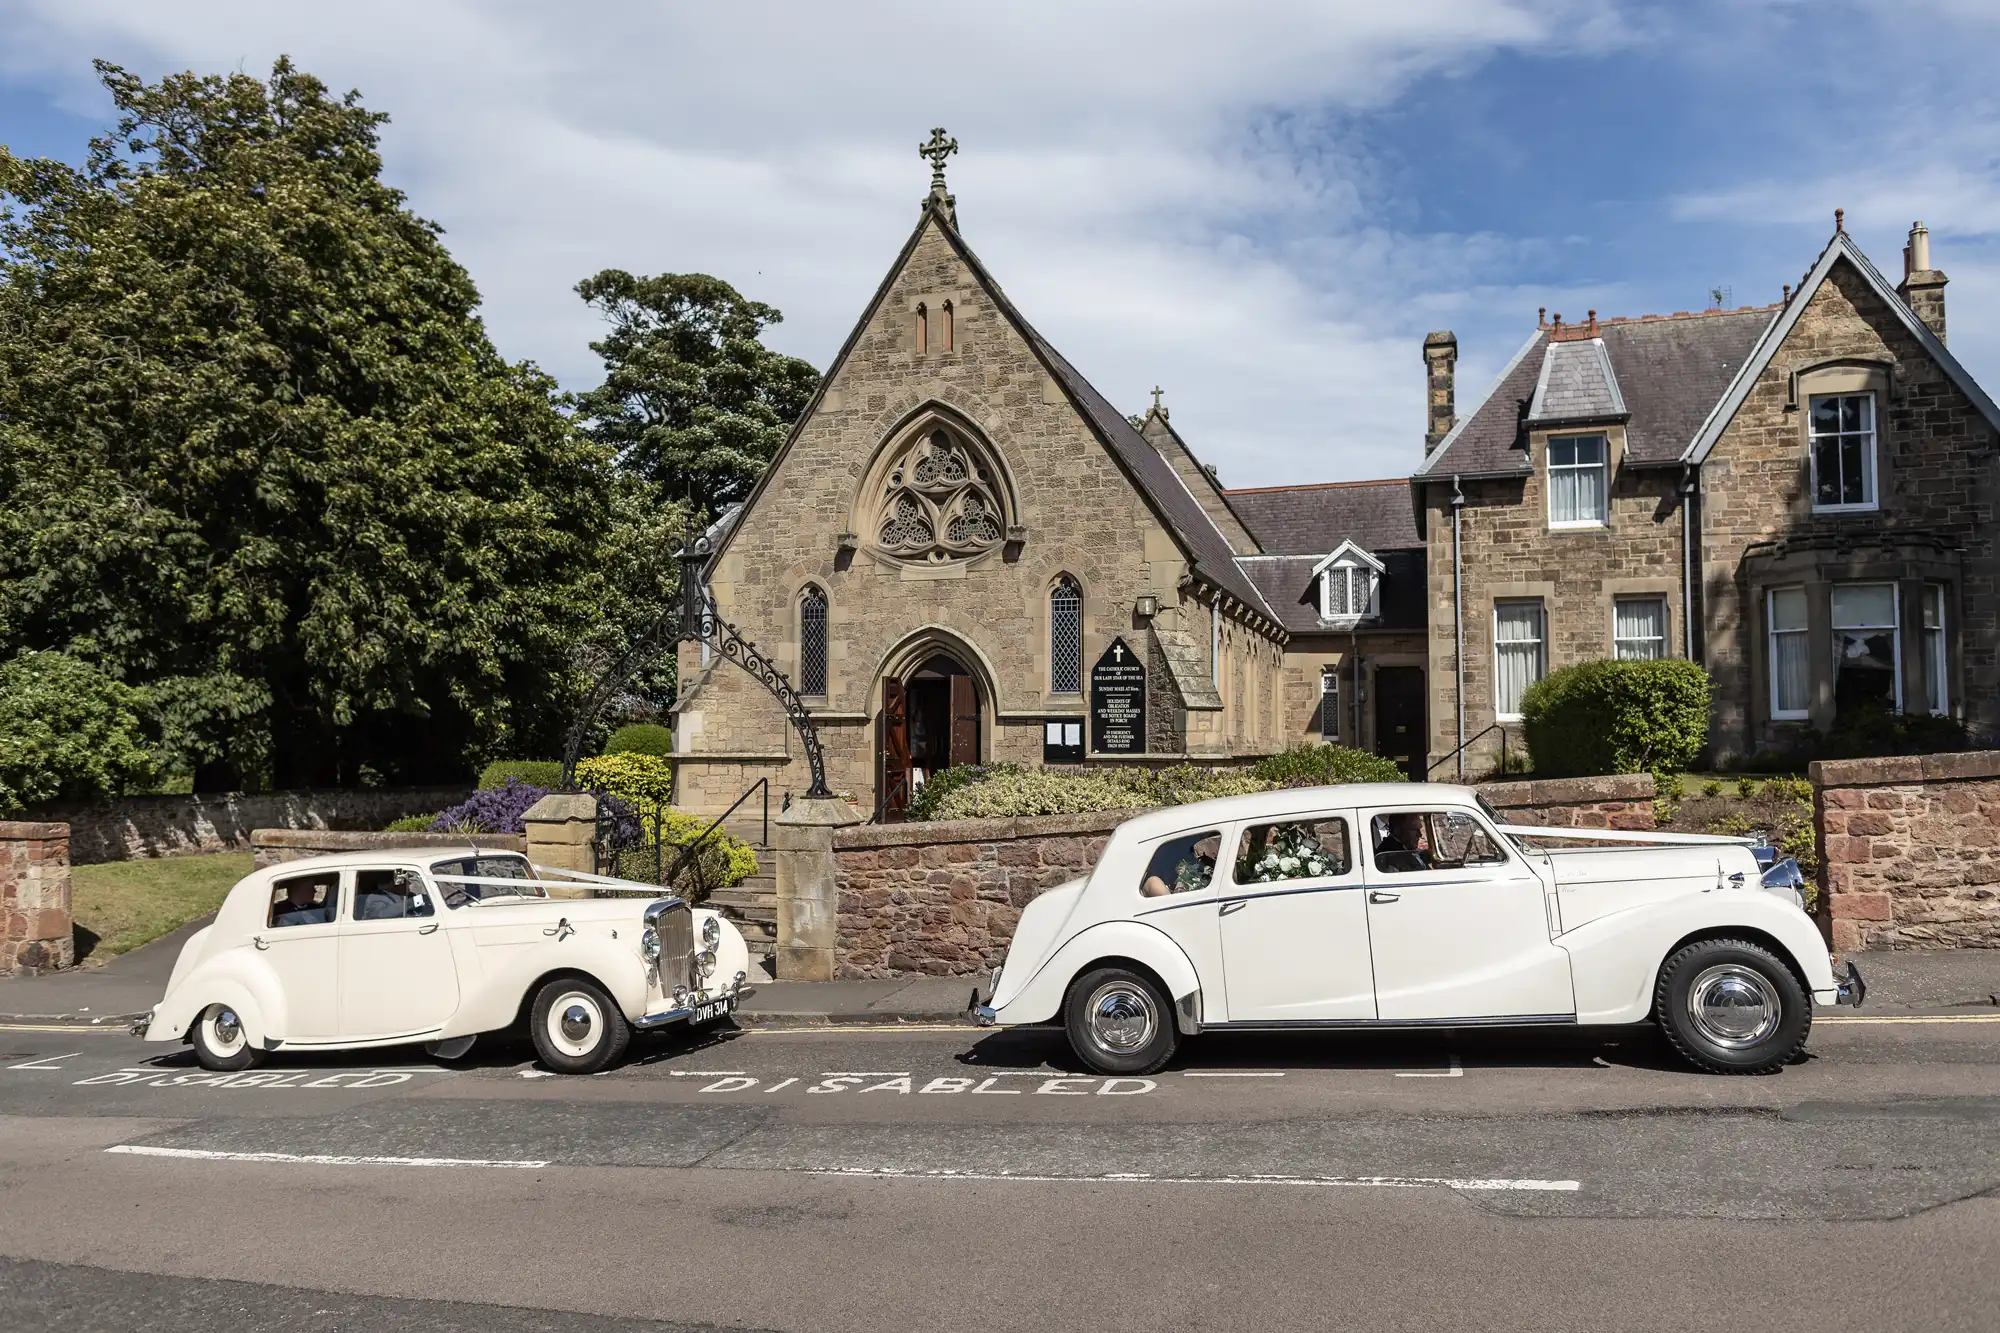 Two vintage white cars parked in front of a quaint stone church with a "Disabled" parking sign on the road.